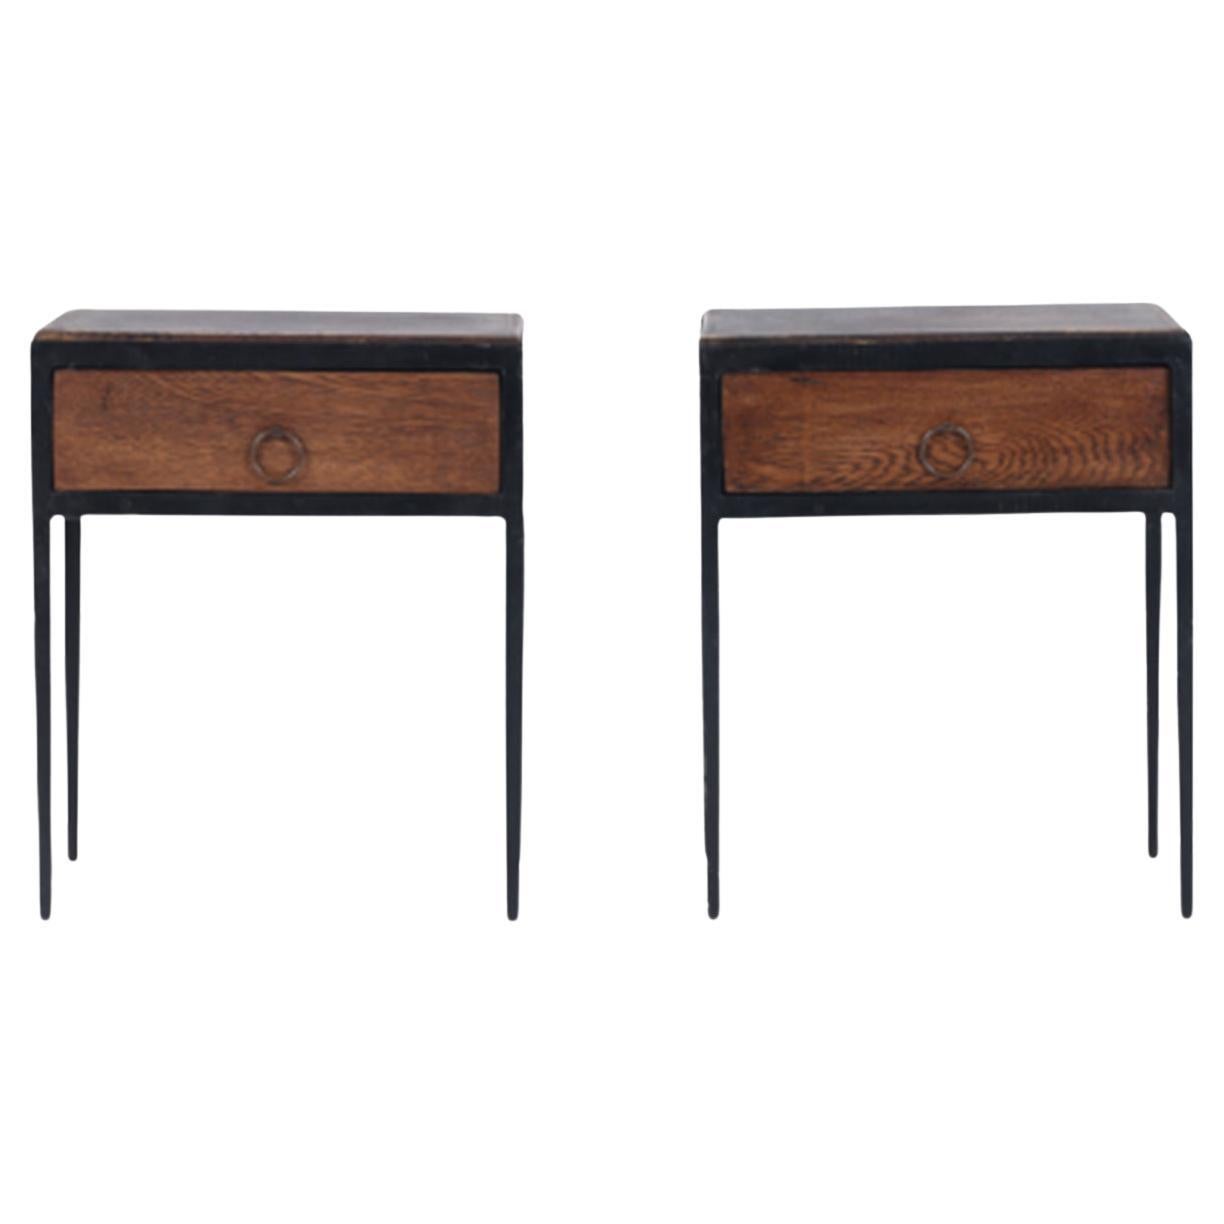 Pair of Oak, Leather and Iron Single Drawer Night Stands, circa 1945